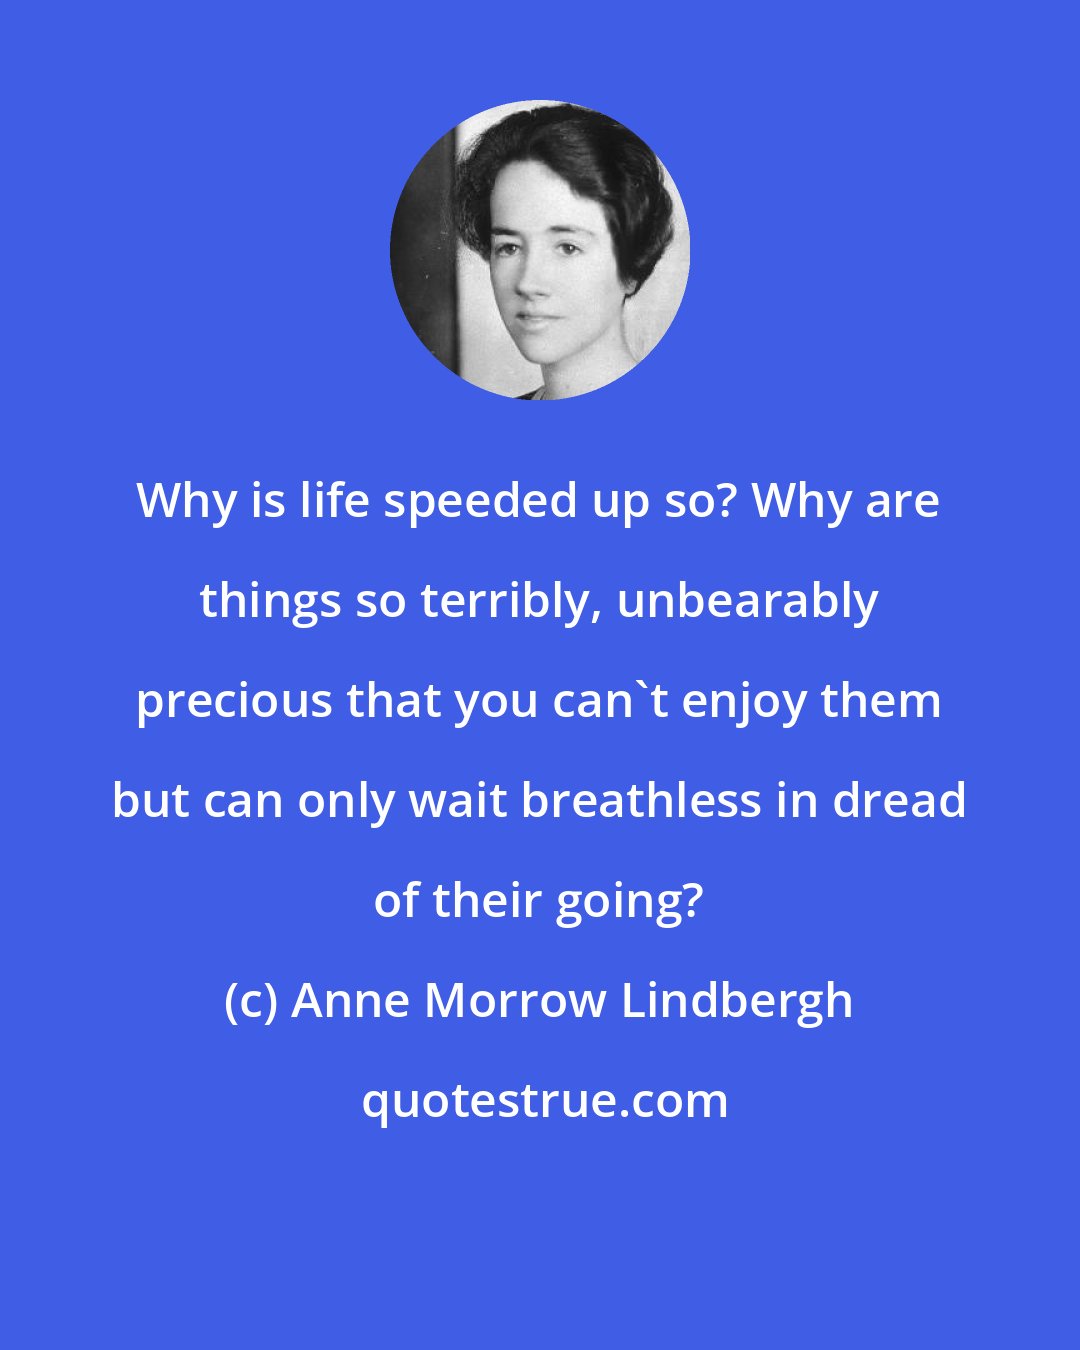 Anne Morrow Lindbergh: Why is life speeded up so? Why are things so terribly, unbearably precious that you can't enjoy them but can only wait breathless in dread of their going?